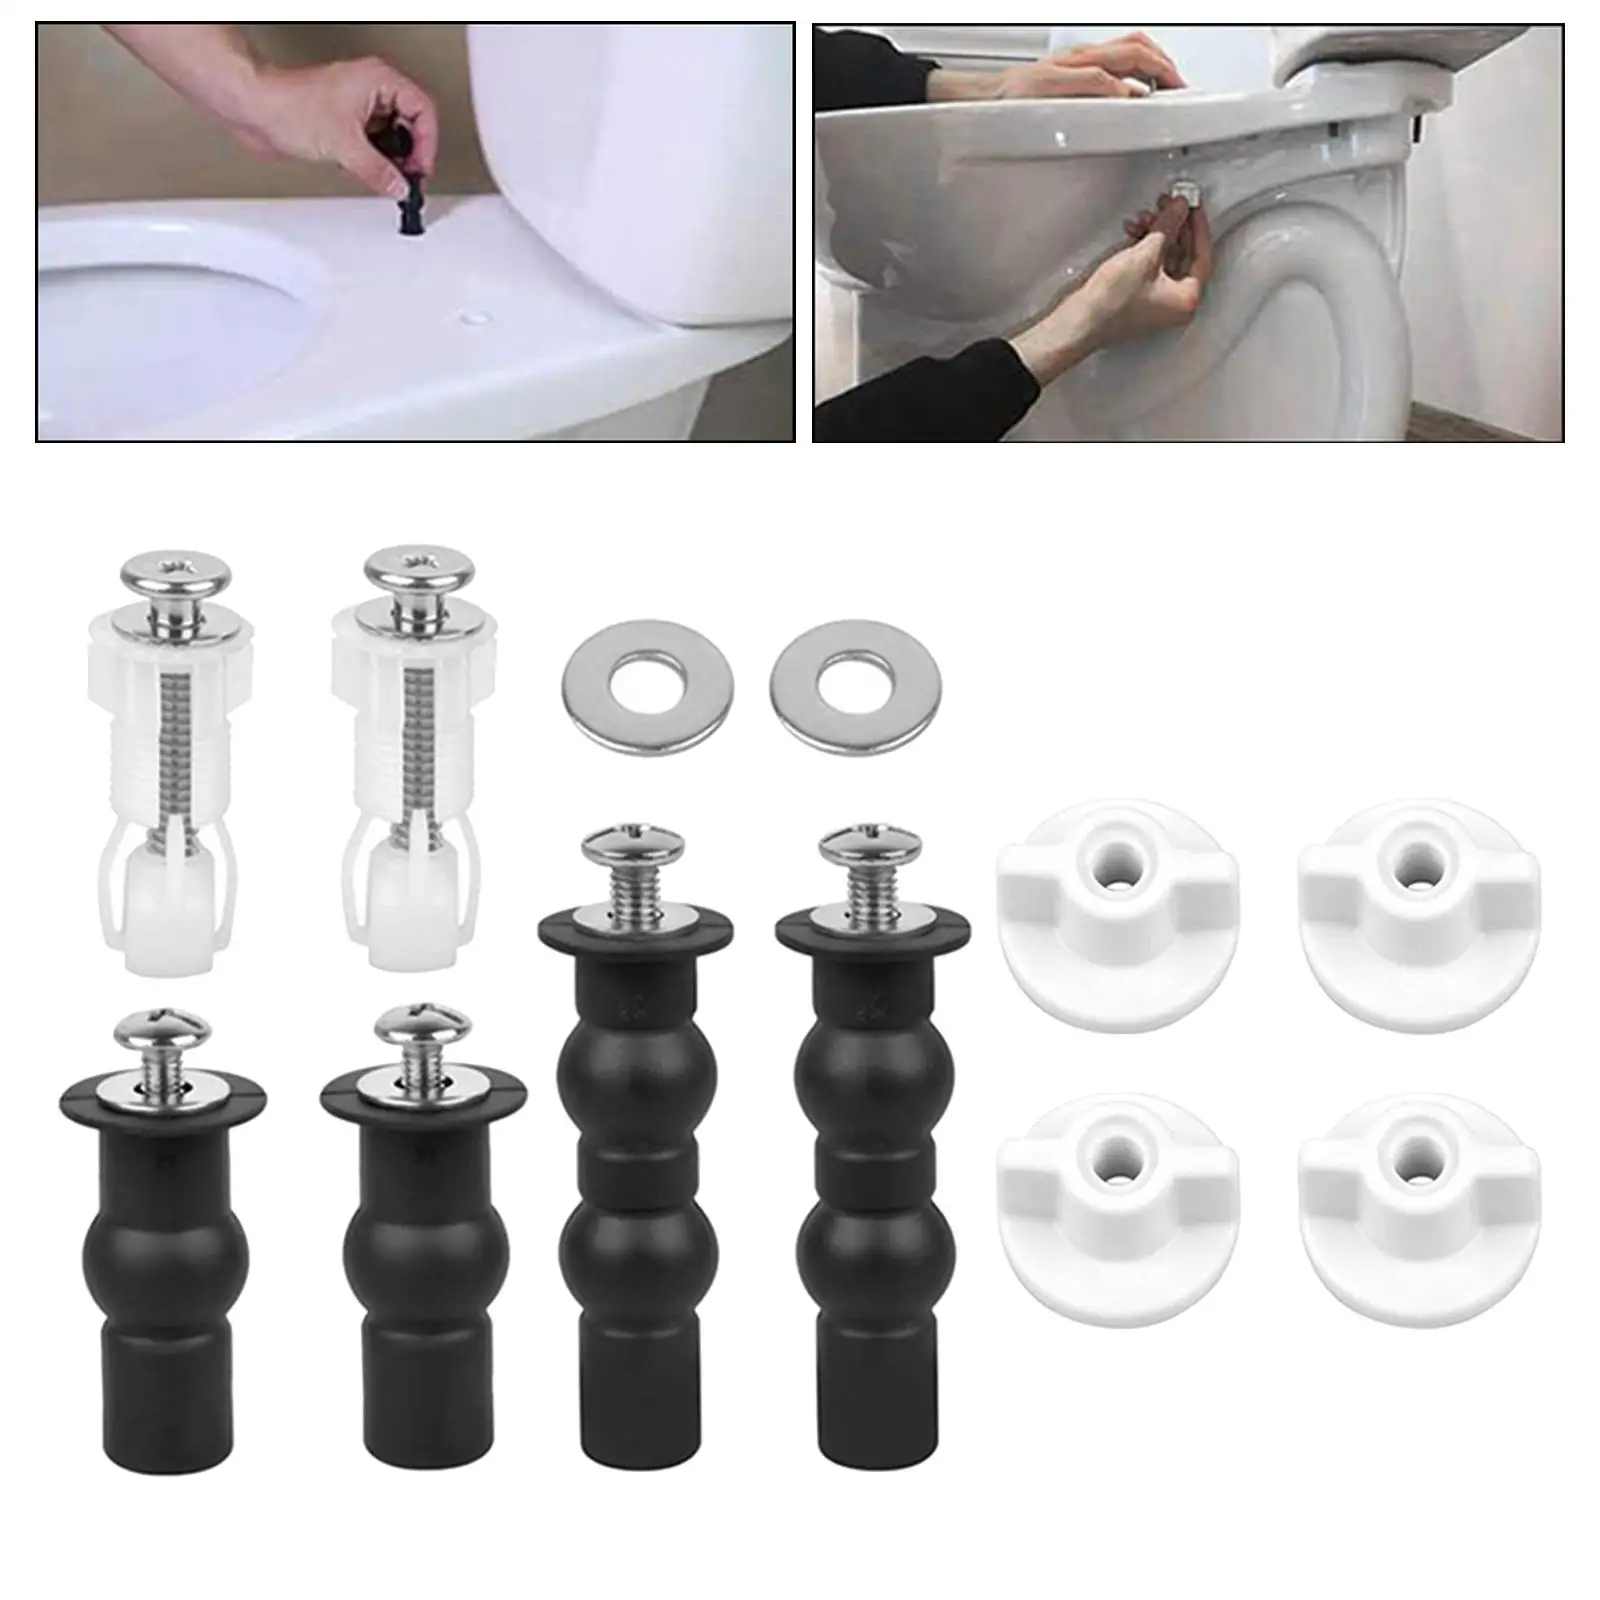 Universal Screw Toilet Toilet Seat Screws Rubber Spreader Bolts Toilet Parts Replacement Toilet Seat Screws 304 Stainless Steel